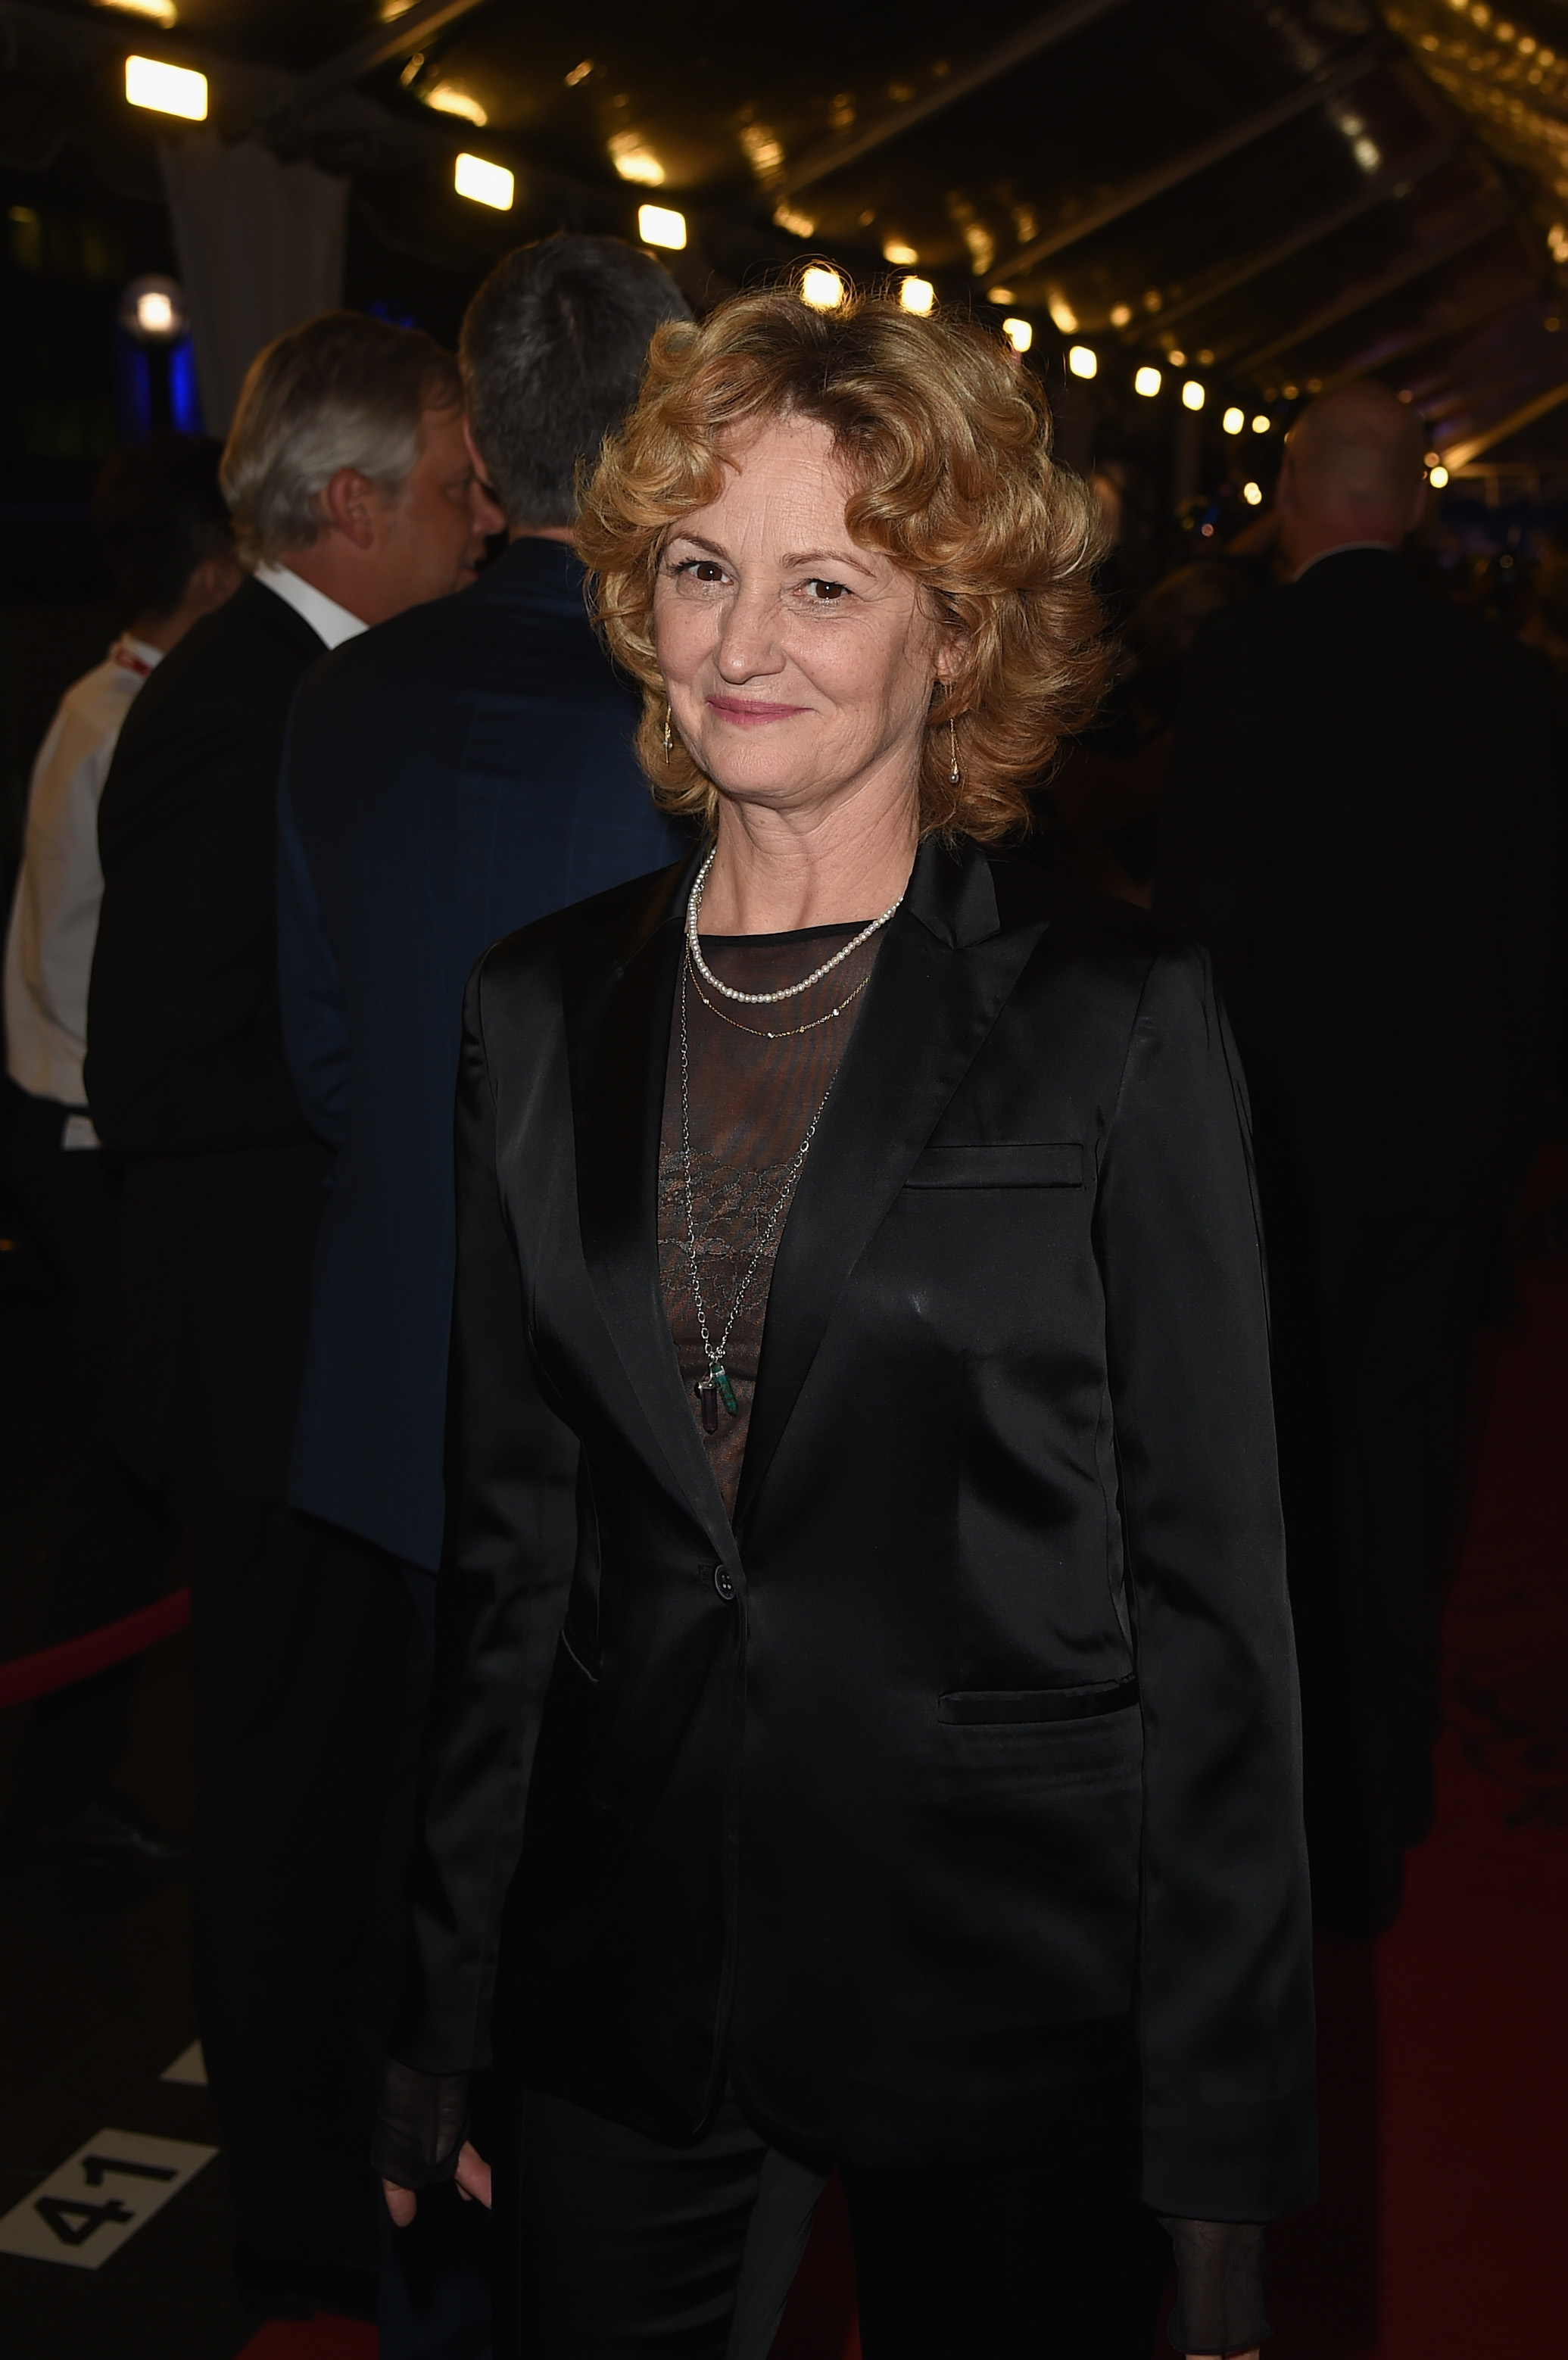 TORONTO, ON - SEPTEMBER 09:  Actress Melissa Leo attends the "Snowden" premiere during the 2016 Toronto International Film Festival at Roy Thomson Hall on September 9, 2016 in Toronto, Canada.  (Photo by Kevin Winter/Getty Images)